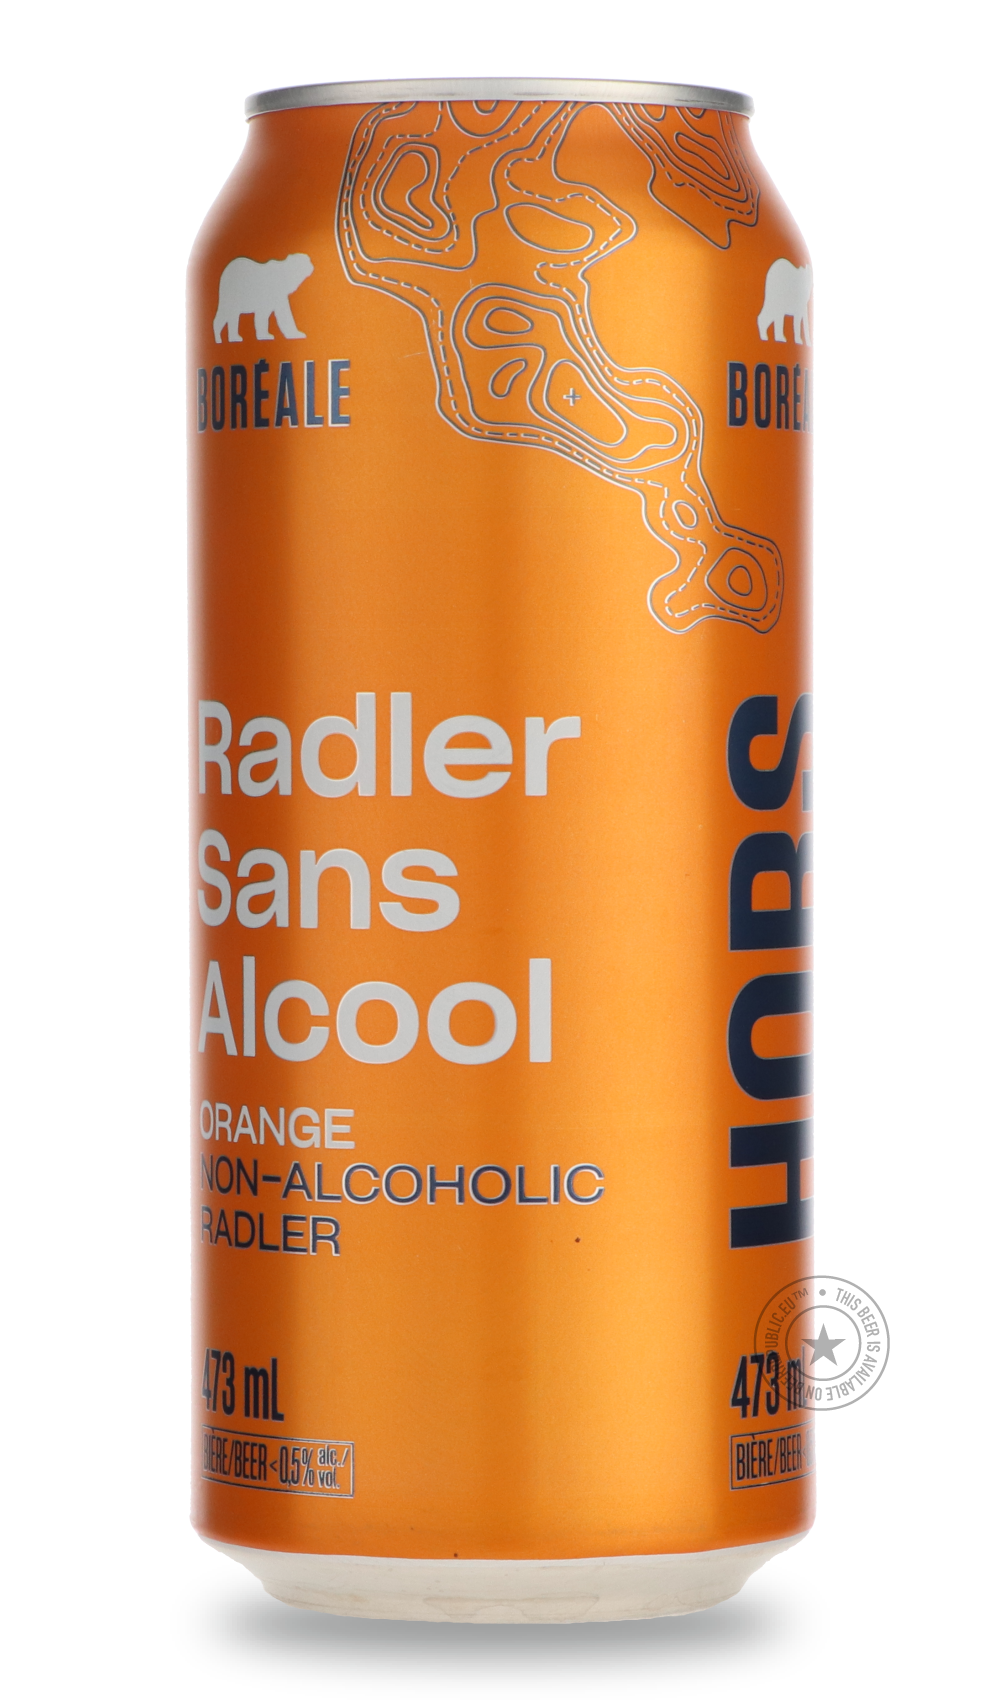 -Boréale- Hors Sentiers - Radler Sans Alcool-Specials- Only @ Beer Republic - The best online beer store for American & Canadian craft beer - Buy beer online from the USA and Canada - Bier online kopen - Amerikaans bier kopen - Craft beer store - Craft beer kopen - Amerikanisch bier kaufen - Bier online kaufen - Acheter biere online - IPA - Stout - Porter - New England IPA - Hazy IPA - Imperial Stout - Barrel Aged - Barrel Aged Imperial Stout - Brown - Dark beer - Blond - Blonde - Pilsner - Lager - Wheat - 